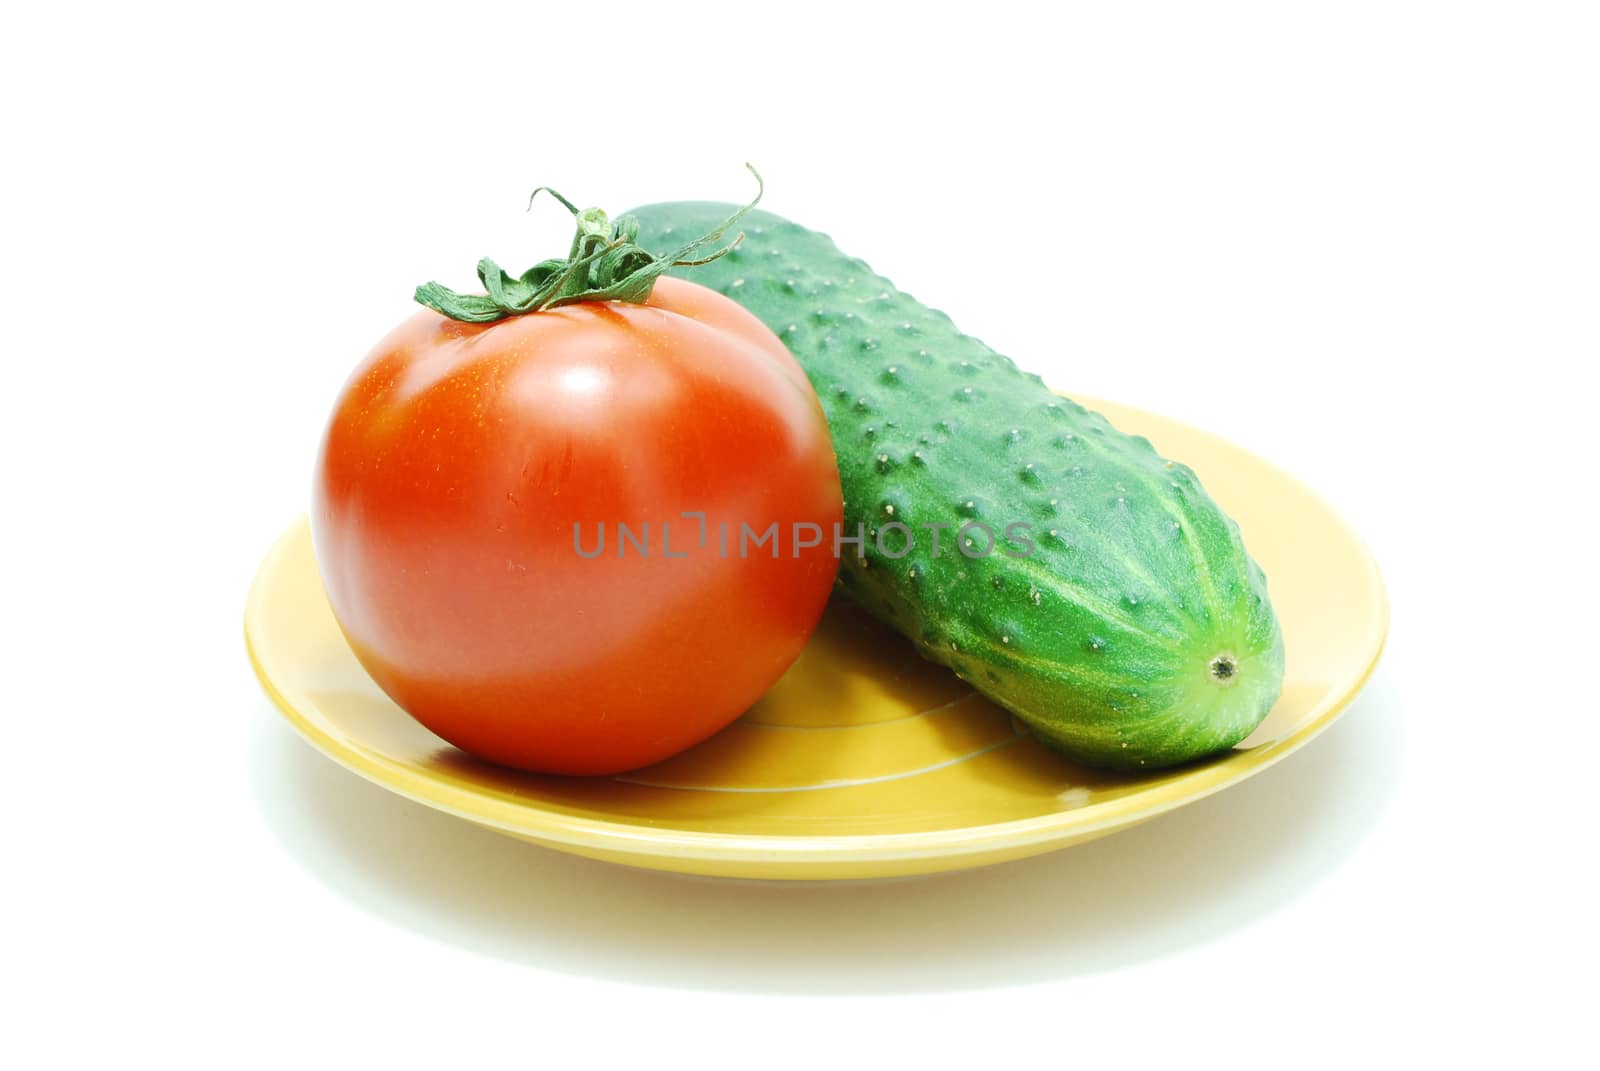 Red Tomato and Green Cucumber on Plate on White Backgrund